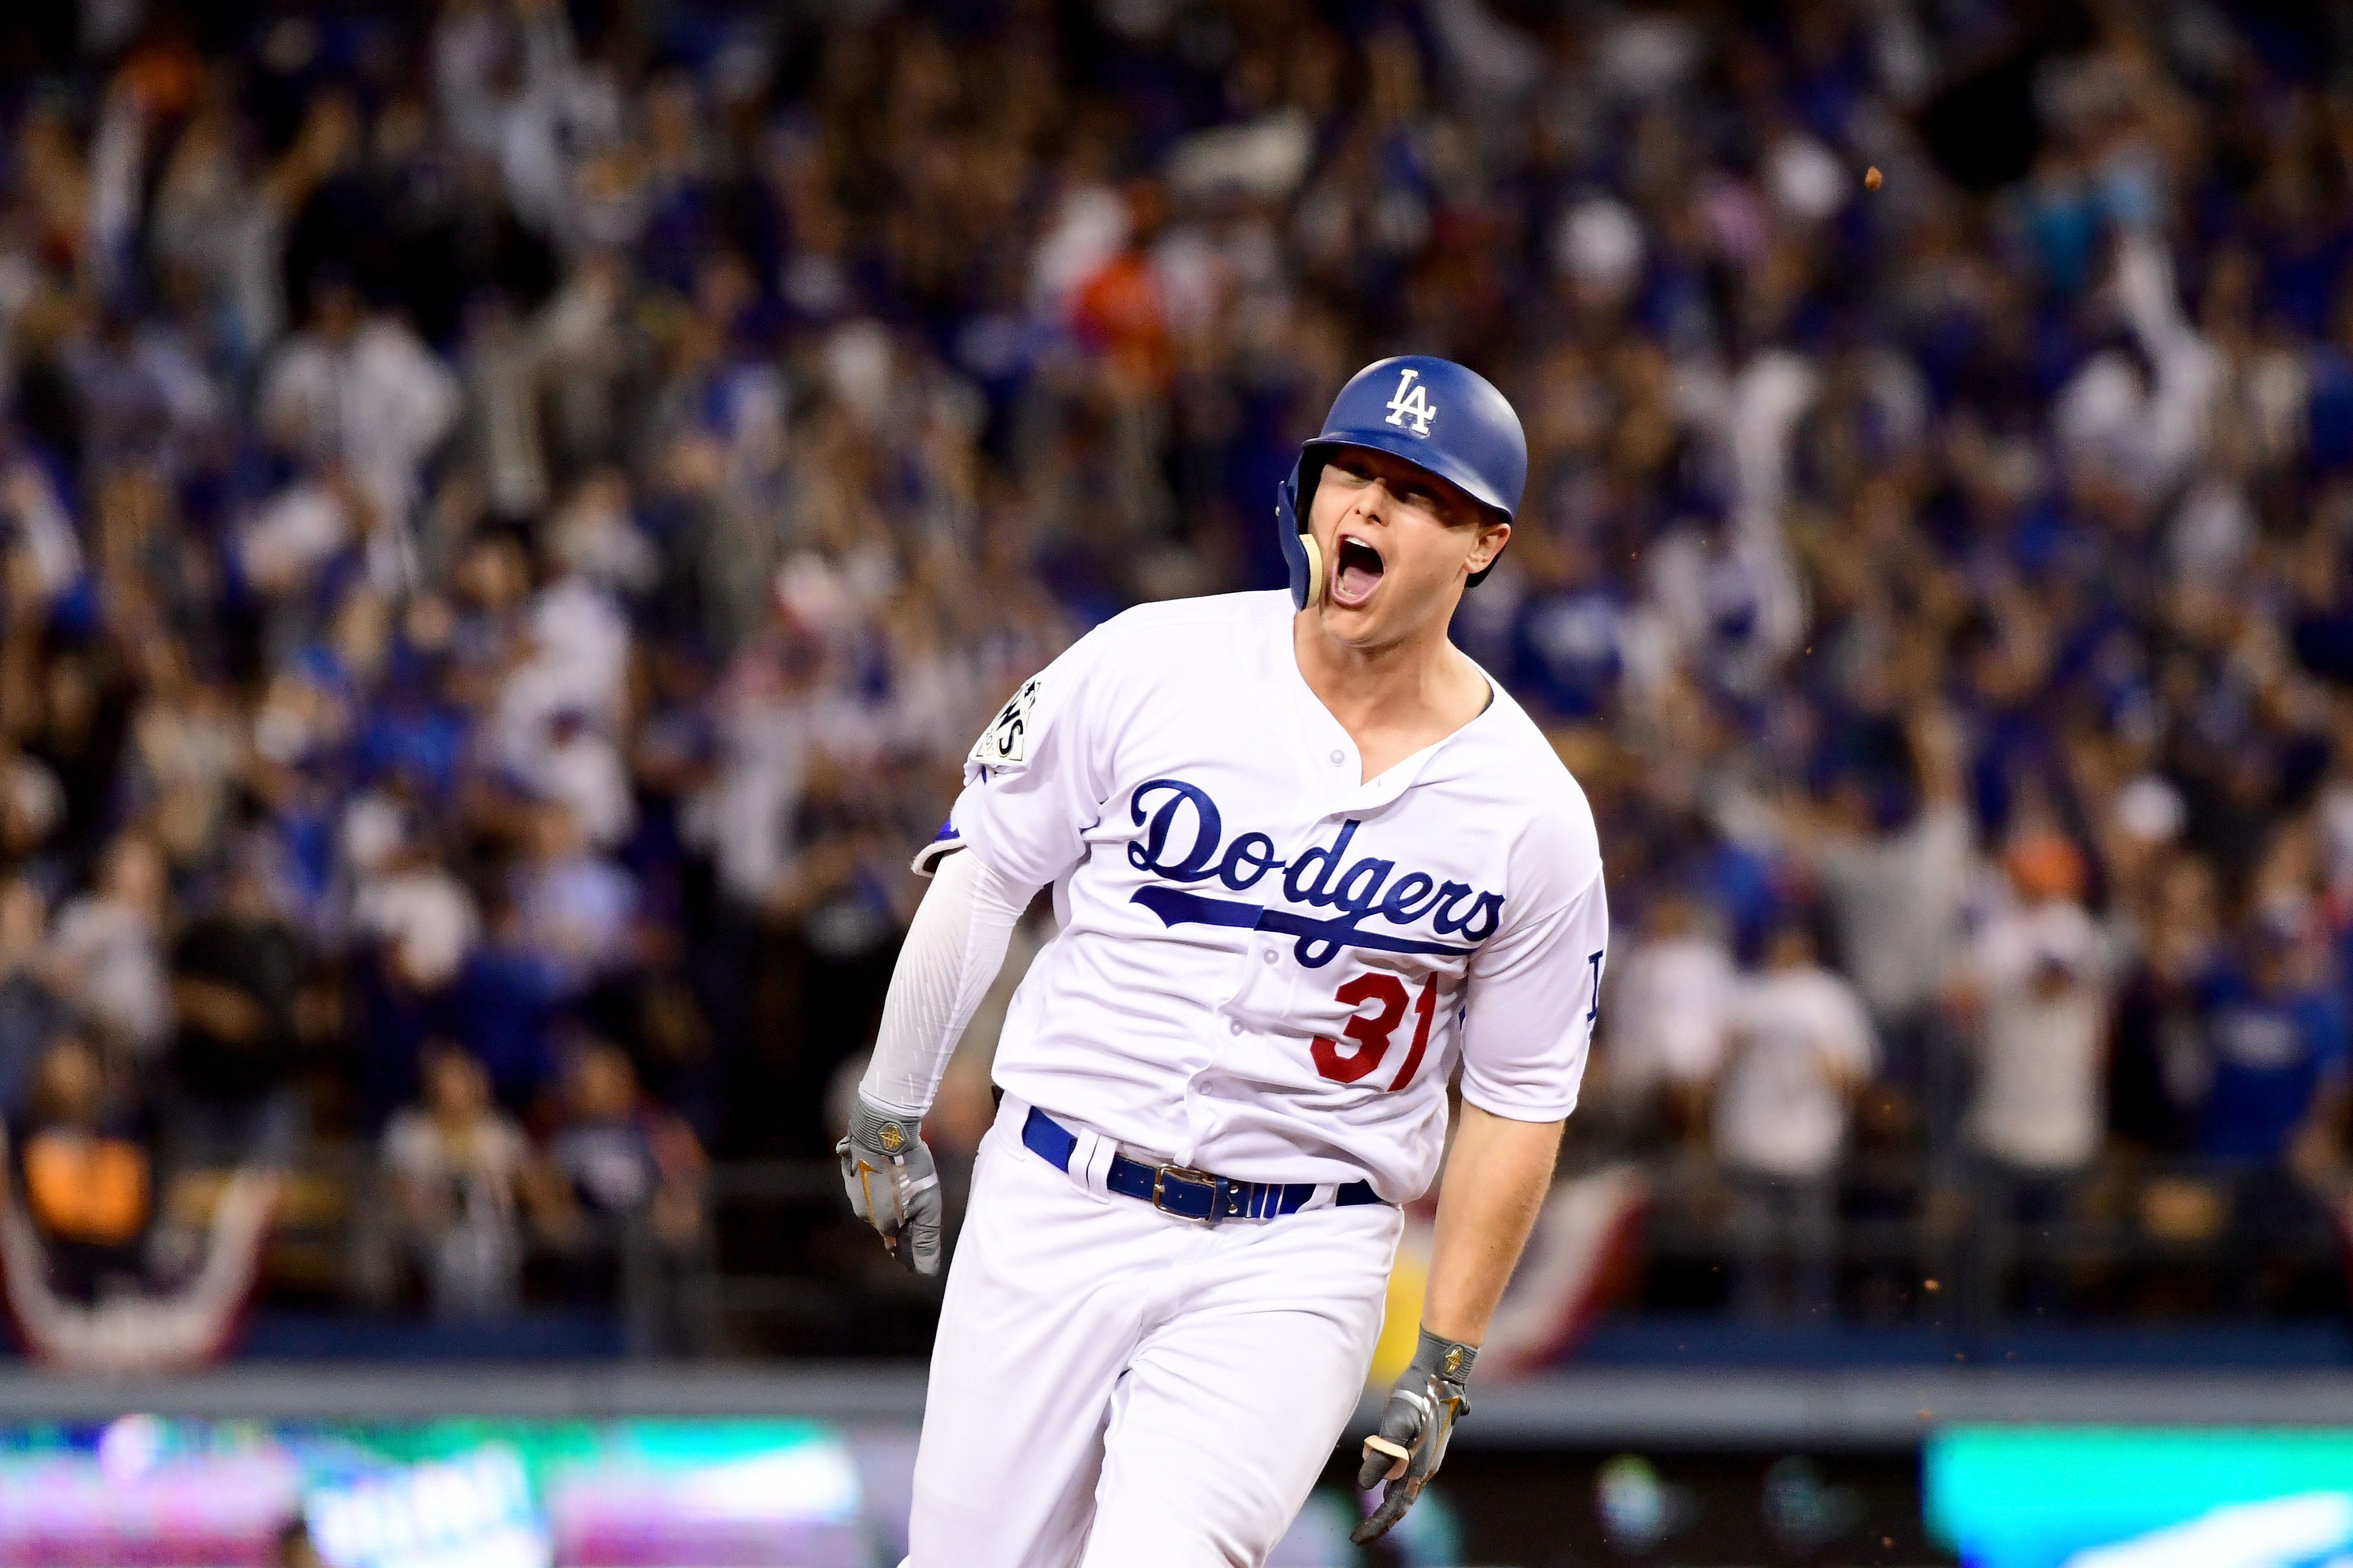 Dodgers: If anyone gets traded this offseason it will be Joc Pederson